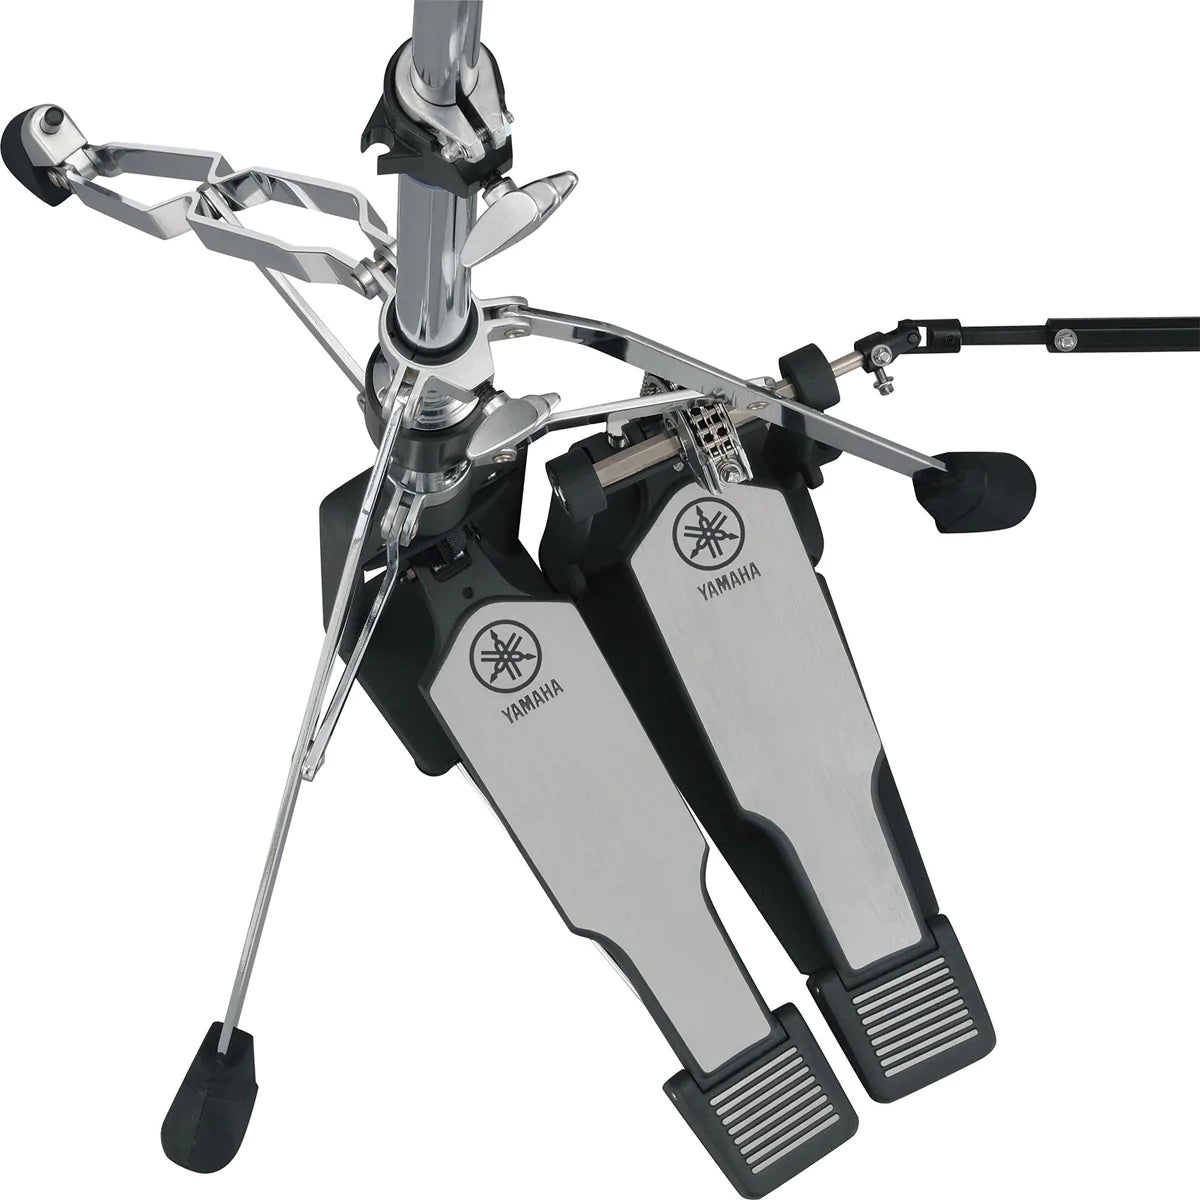 Yamaha DFP9500CL Chain Drive Double Bass Drum Pedal (Left Footed)